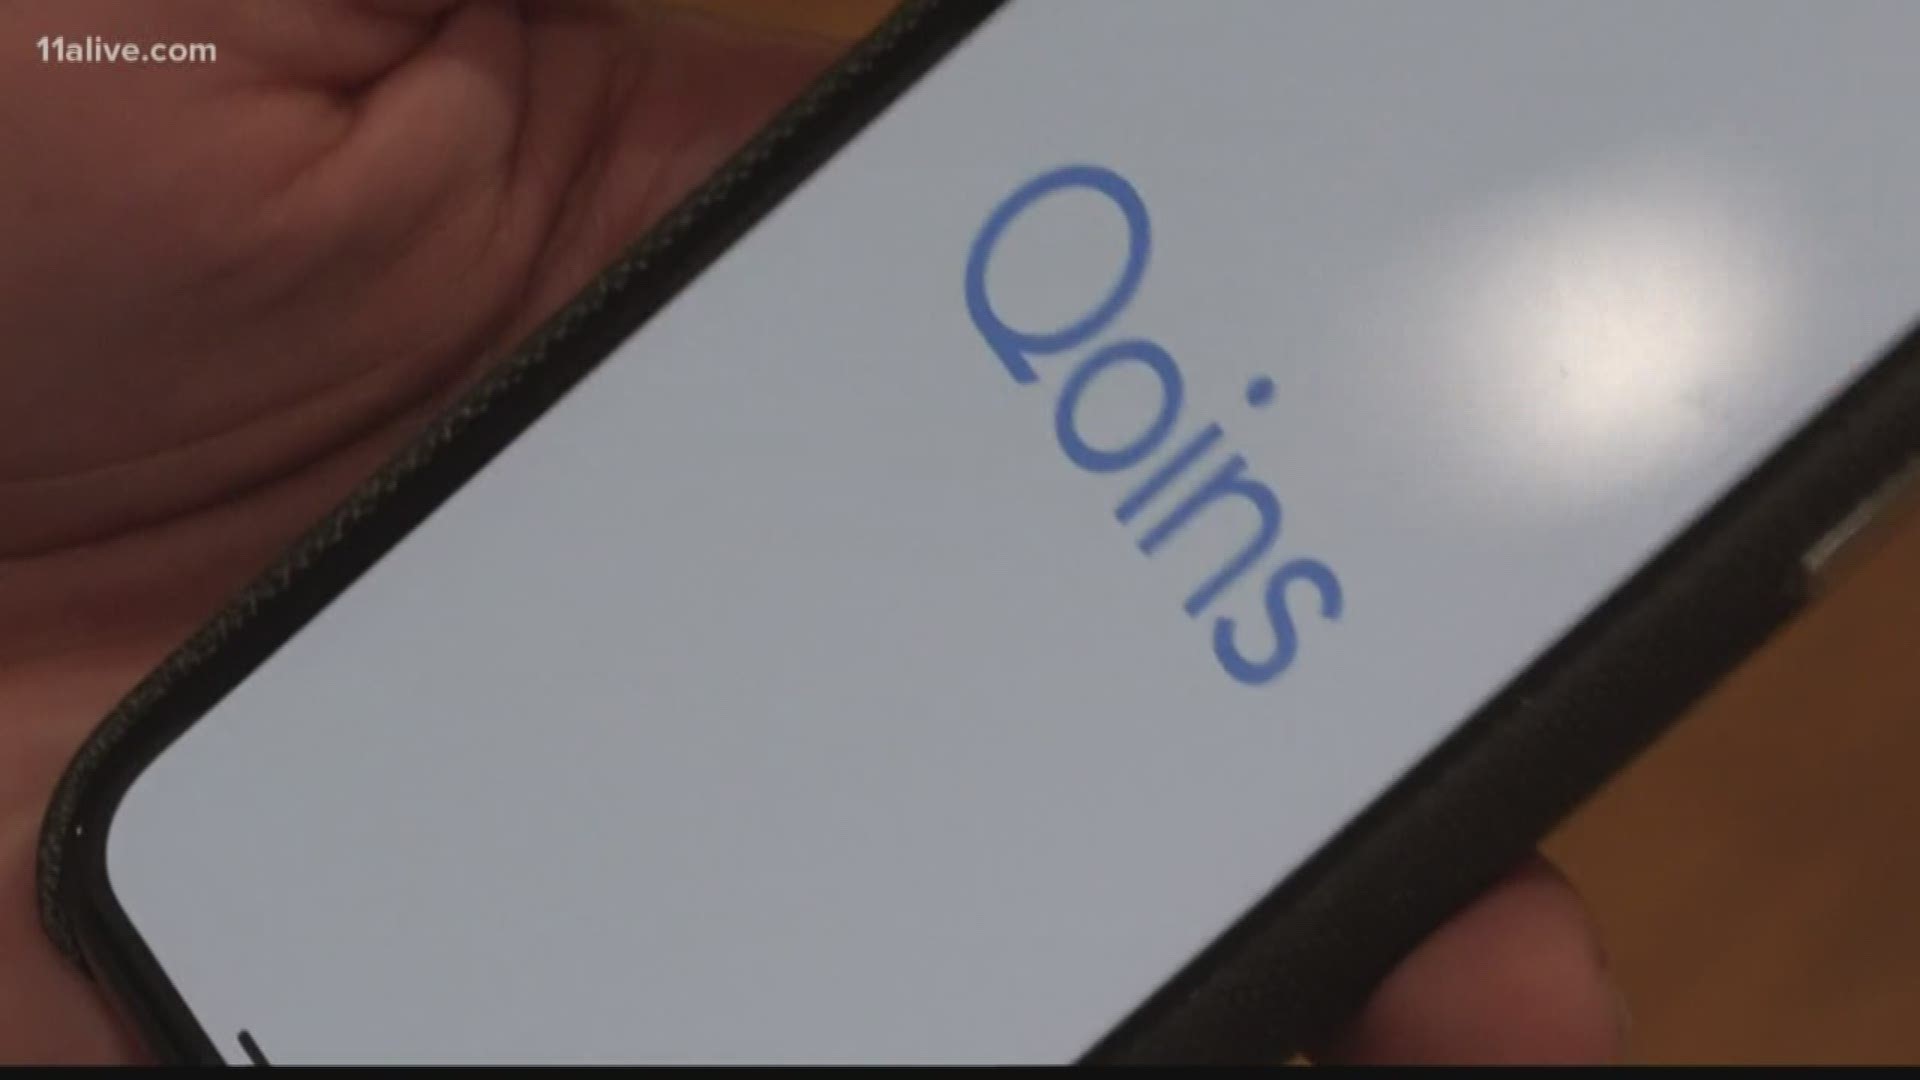 They created the mobile app called "Qoins".